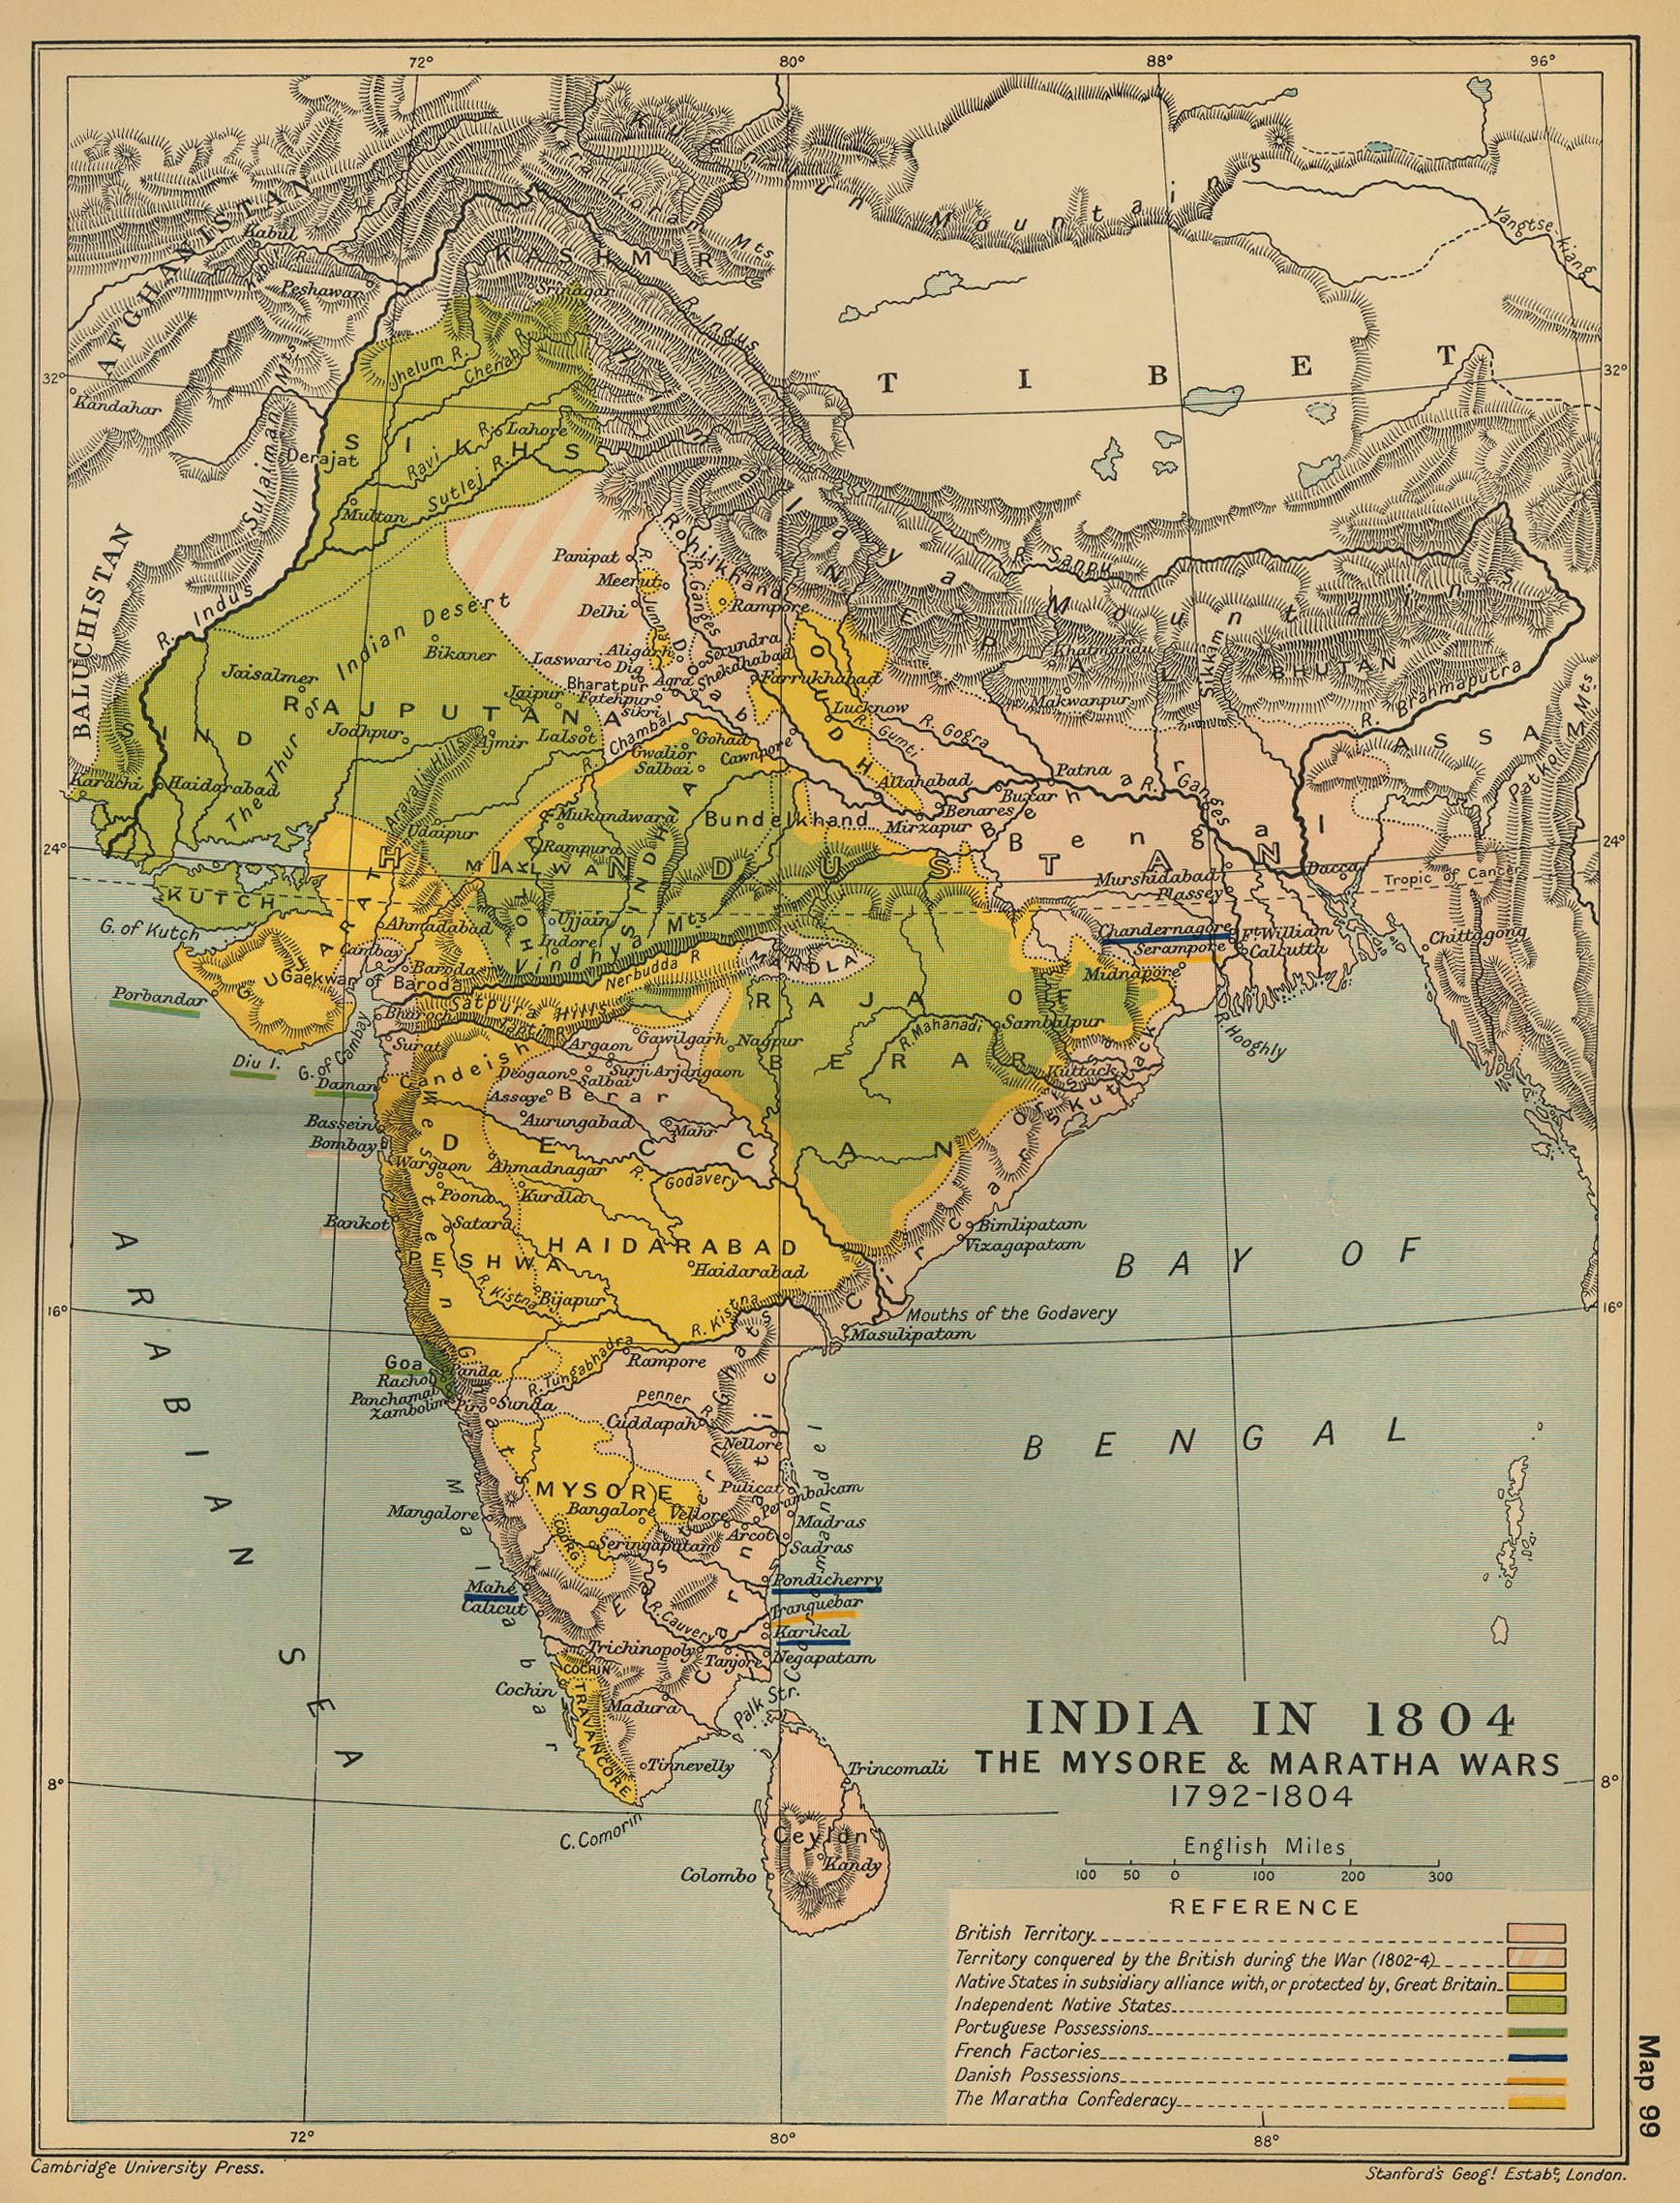 Map of India in 1804: The Mysore & Maratha Wars 1792-1804